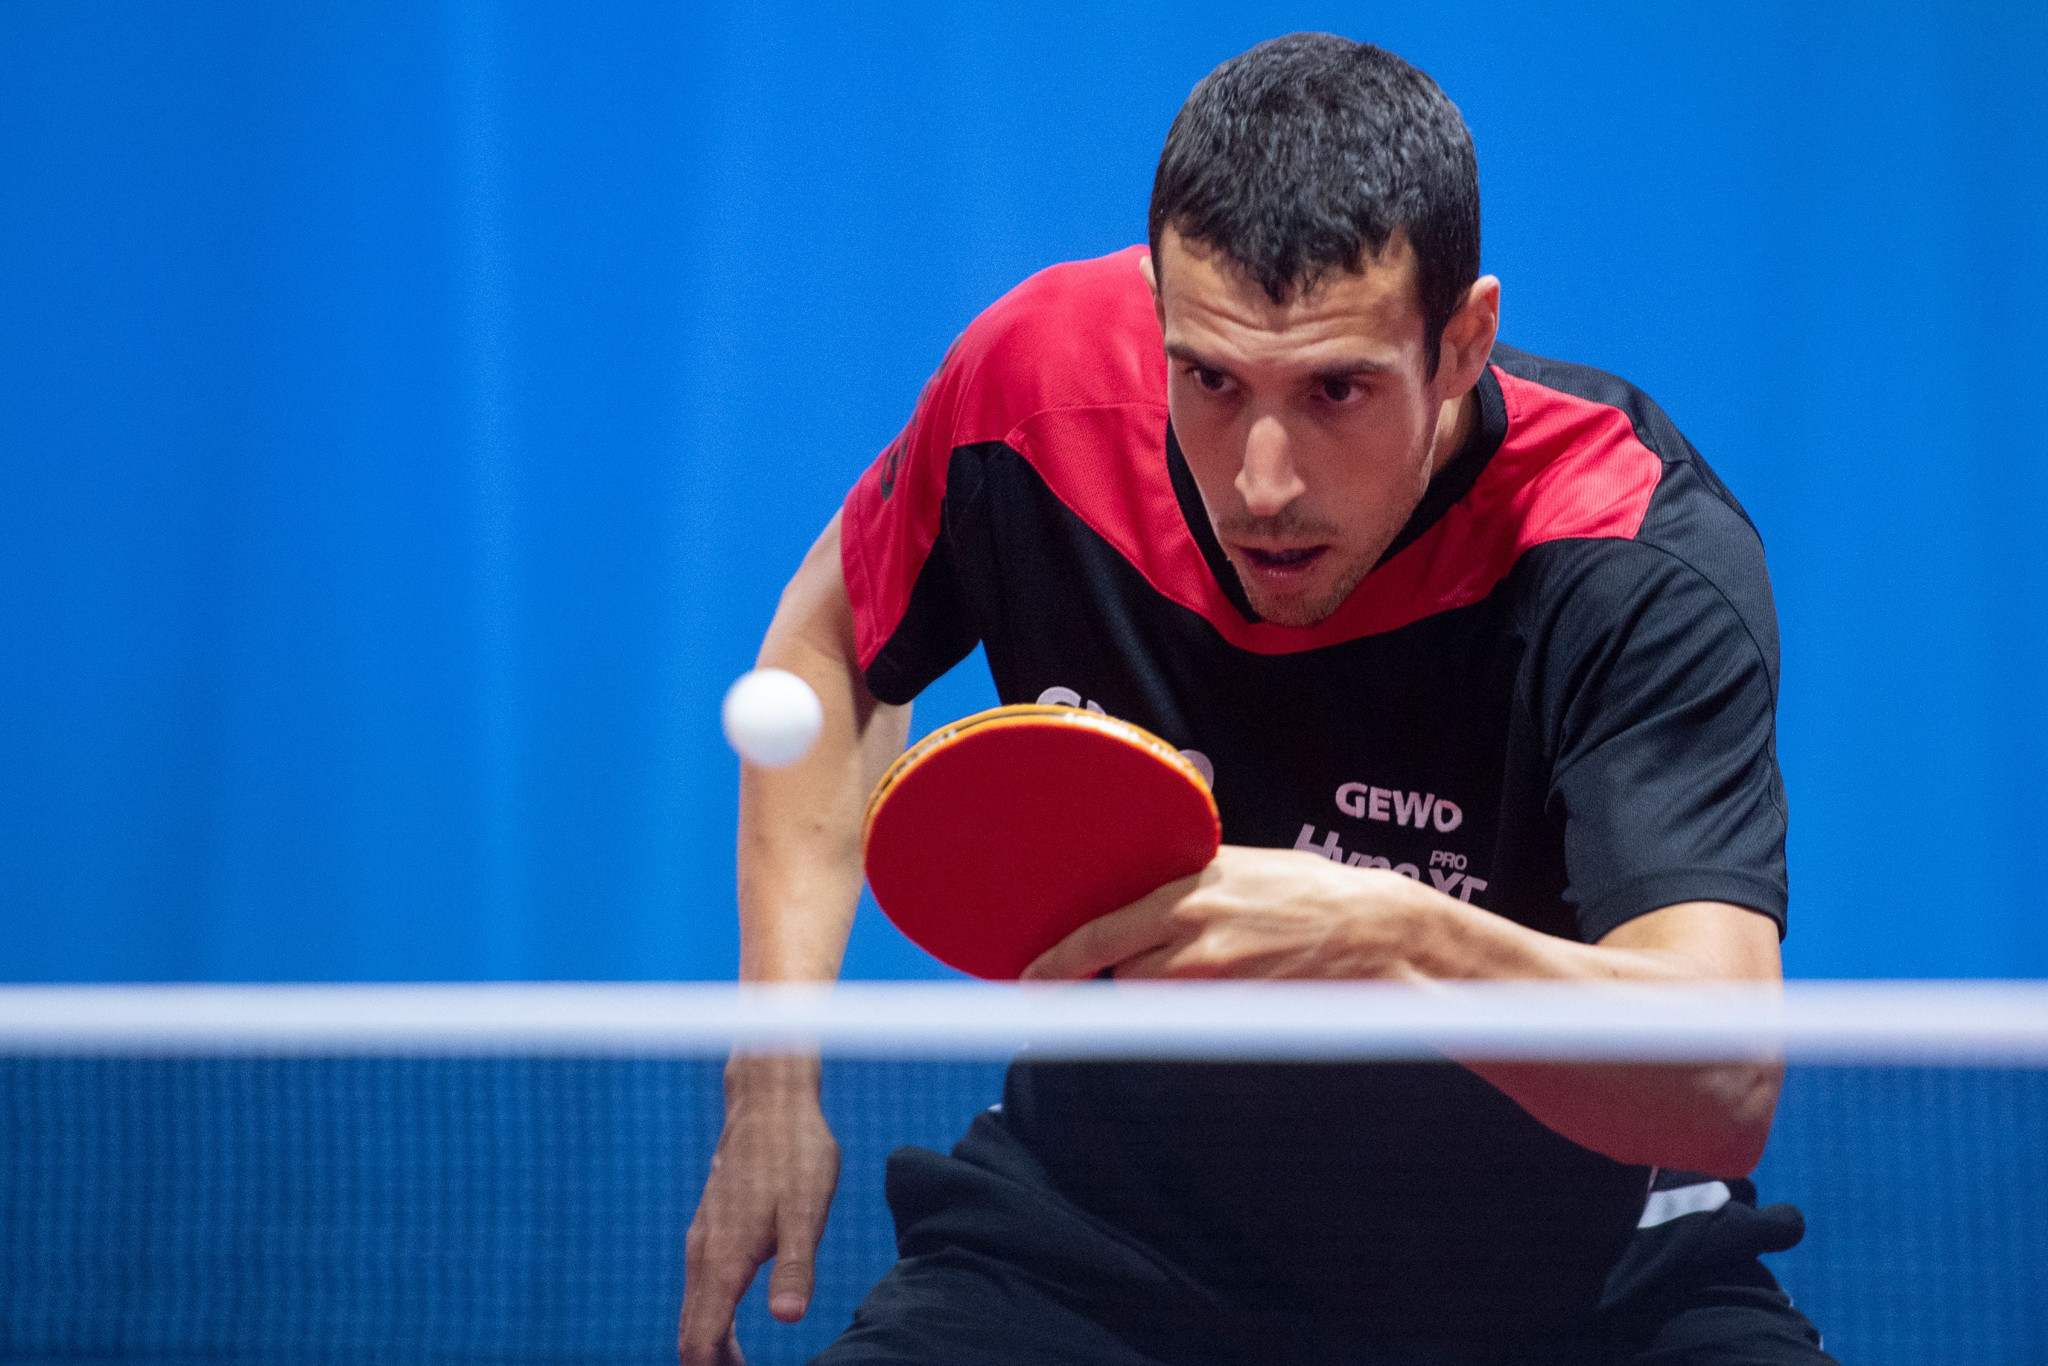 Alvaro Robles of Spain qualified for Tokyo 2020 after winning his last four match at the ITTF European Olympic Singles Qualification Tournament ©Getty Images